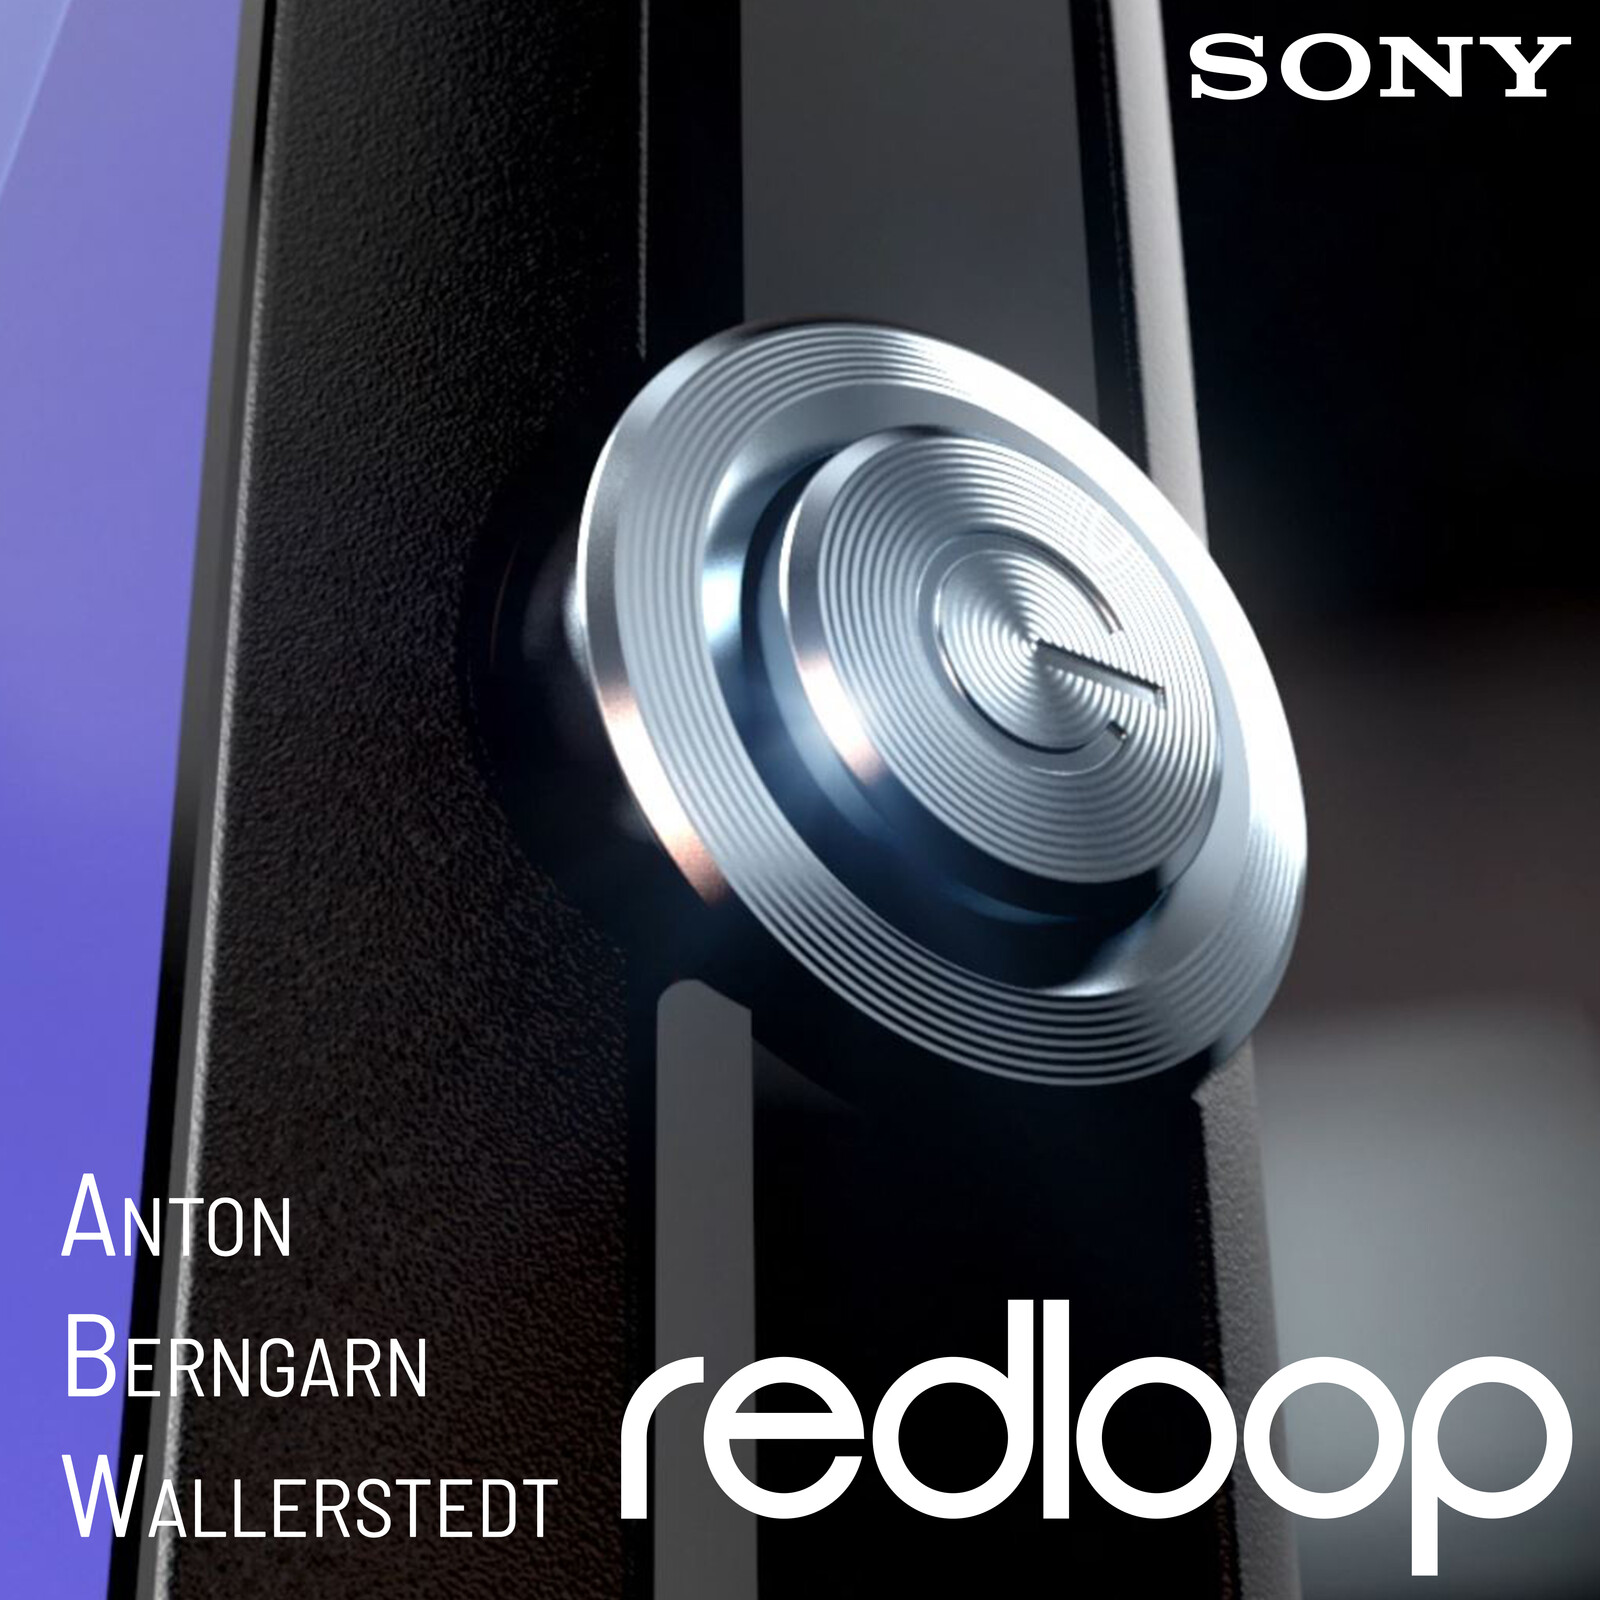 Sony Mobile Product Beauty Videos by Redloop (2014 - 2015)